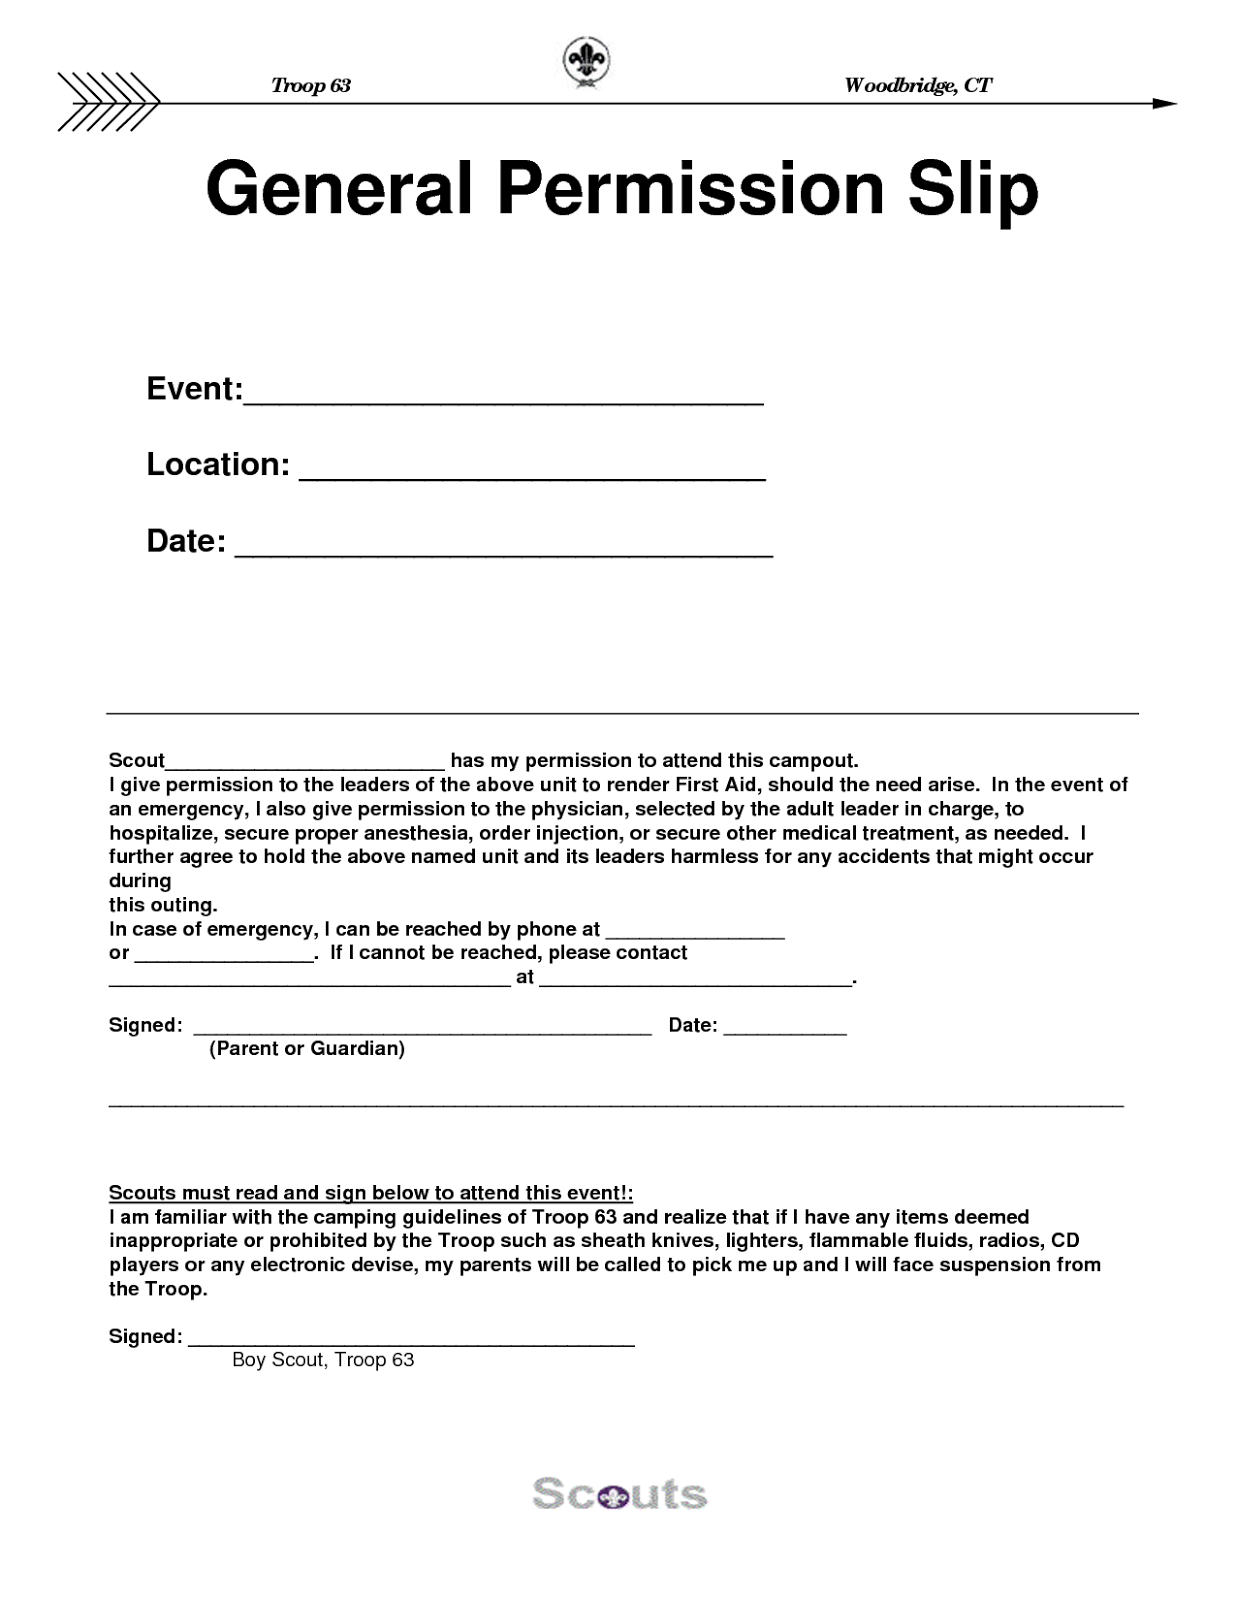 the-business-of-confidence-a-life-changing-permission-slip